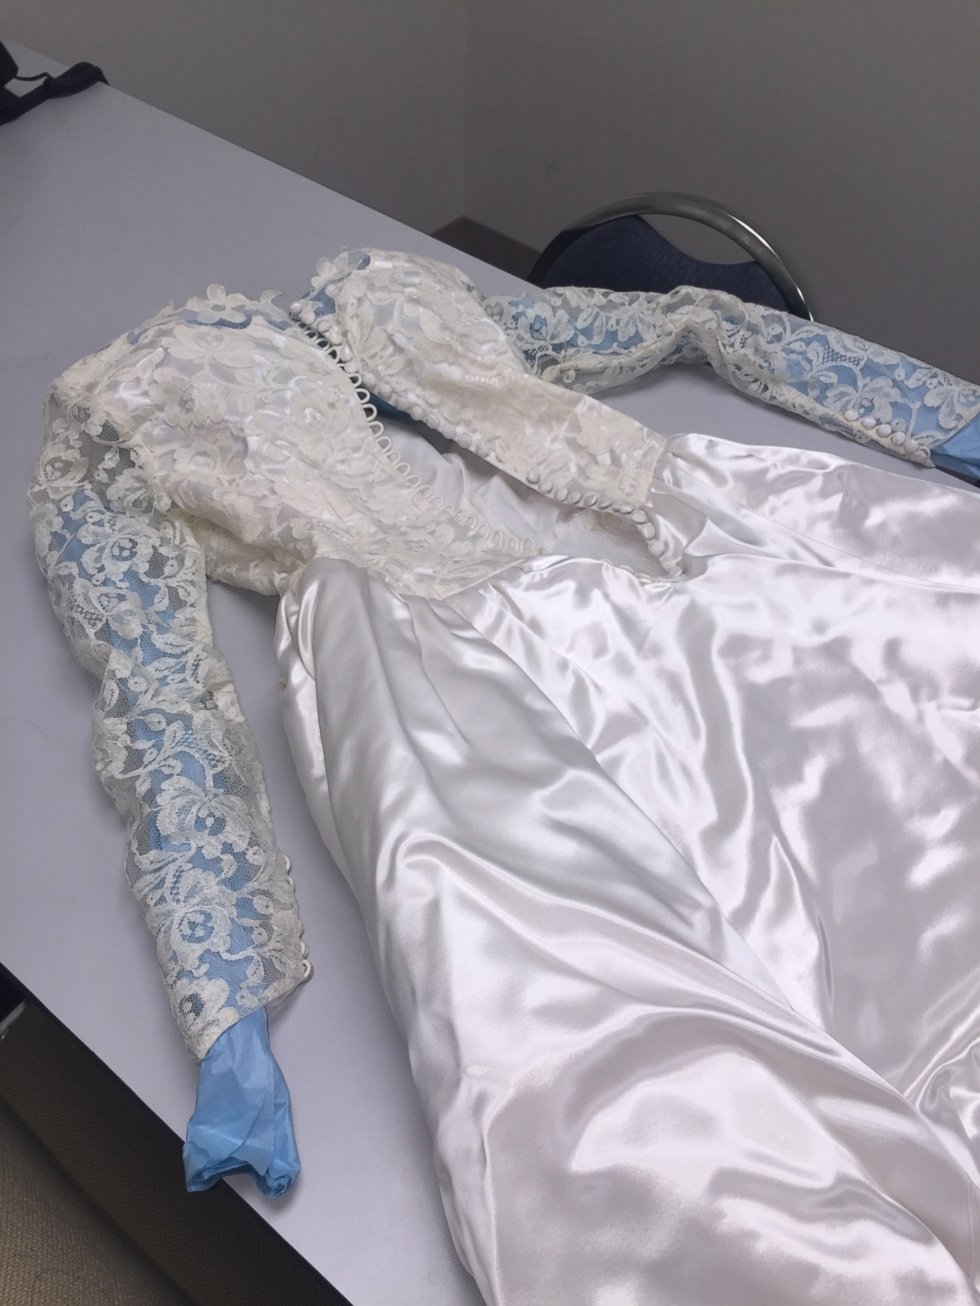 PHOTO: Police Search for Owner of ‘Heirloom’ Wedding Dress Blown by Torrnadoes